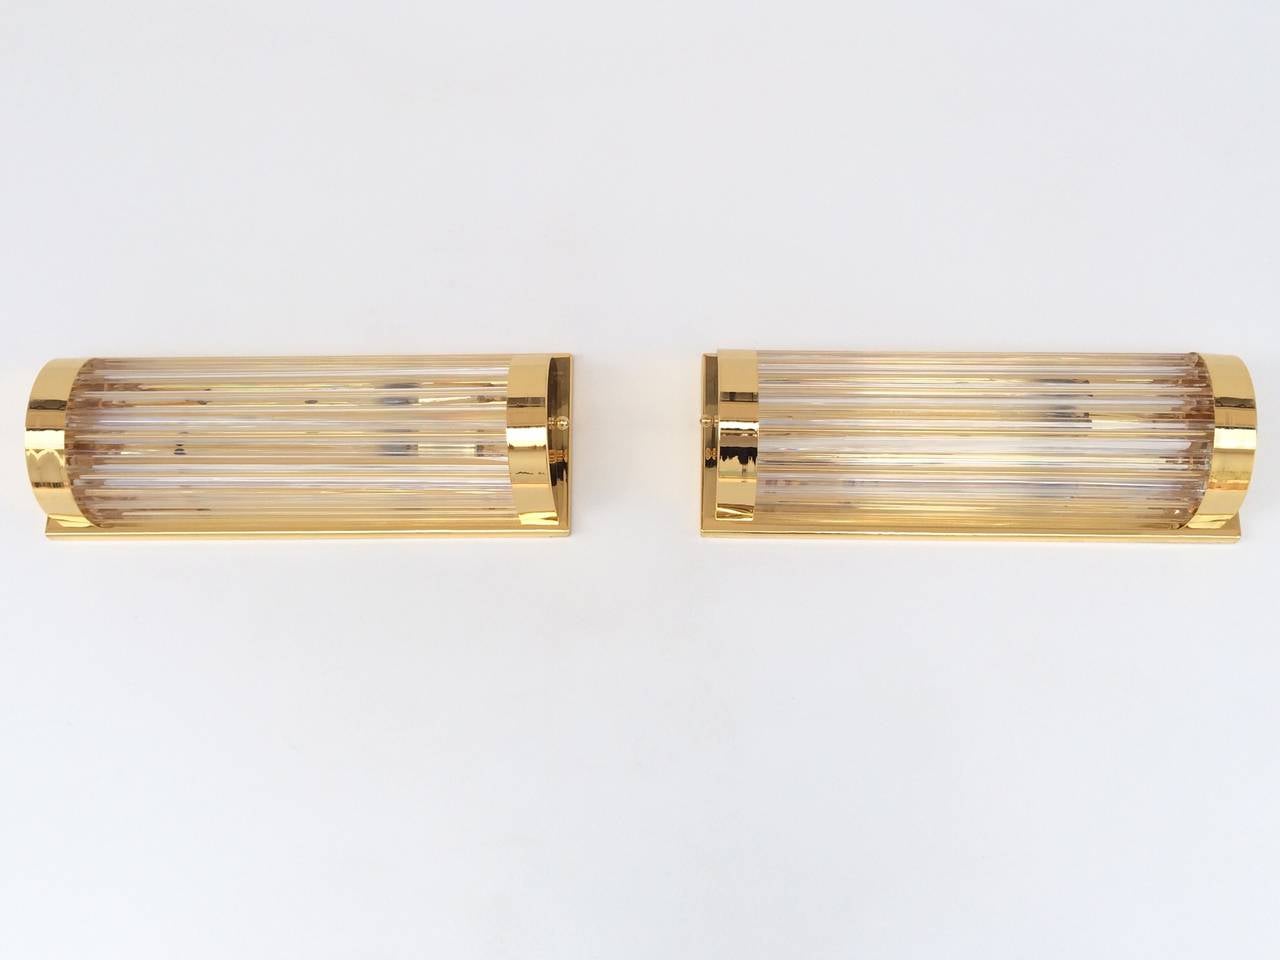 A pair of rare Murano wall sconces designed by Venini.
Polished brass with glass rods. 
Like new condition!